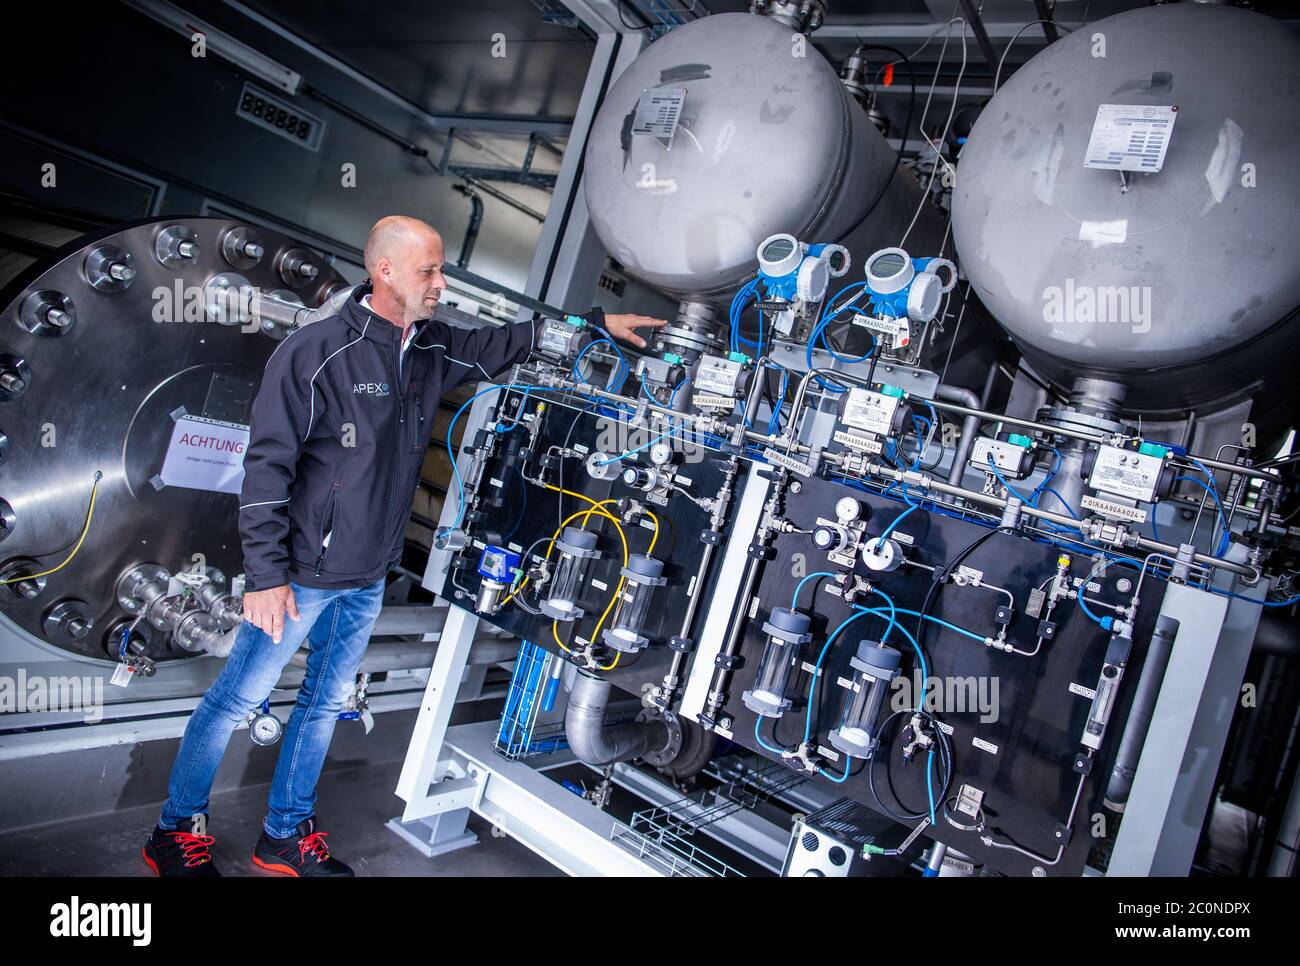 Laage, Germany. 12th June, 2020. Plant Guido from the company Apex Energy is testing electrolysis plant in what the company says is the largest grid-connected power plant in